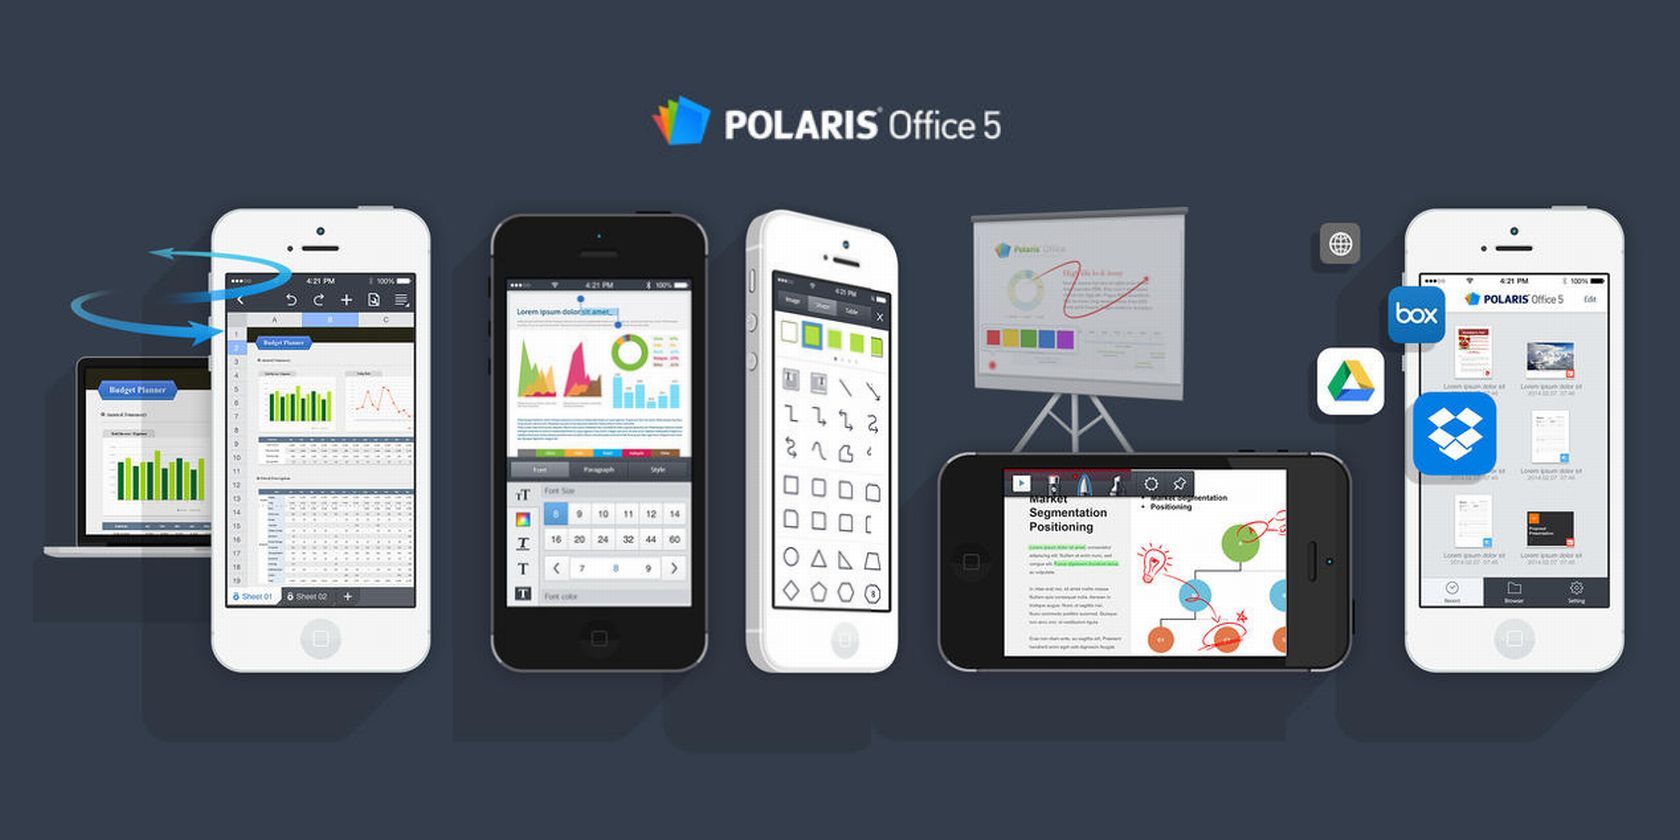 Polaris Office 5 Brings Spellcheck, Better Microsoft Office Support & iOS 7  Style